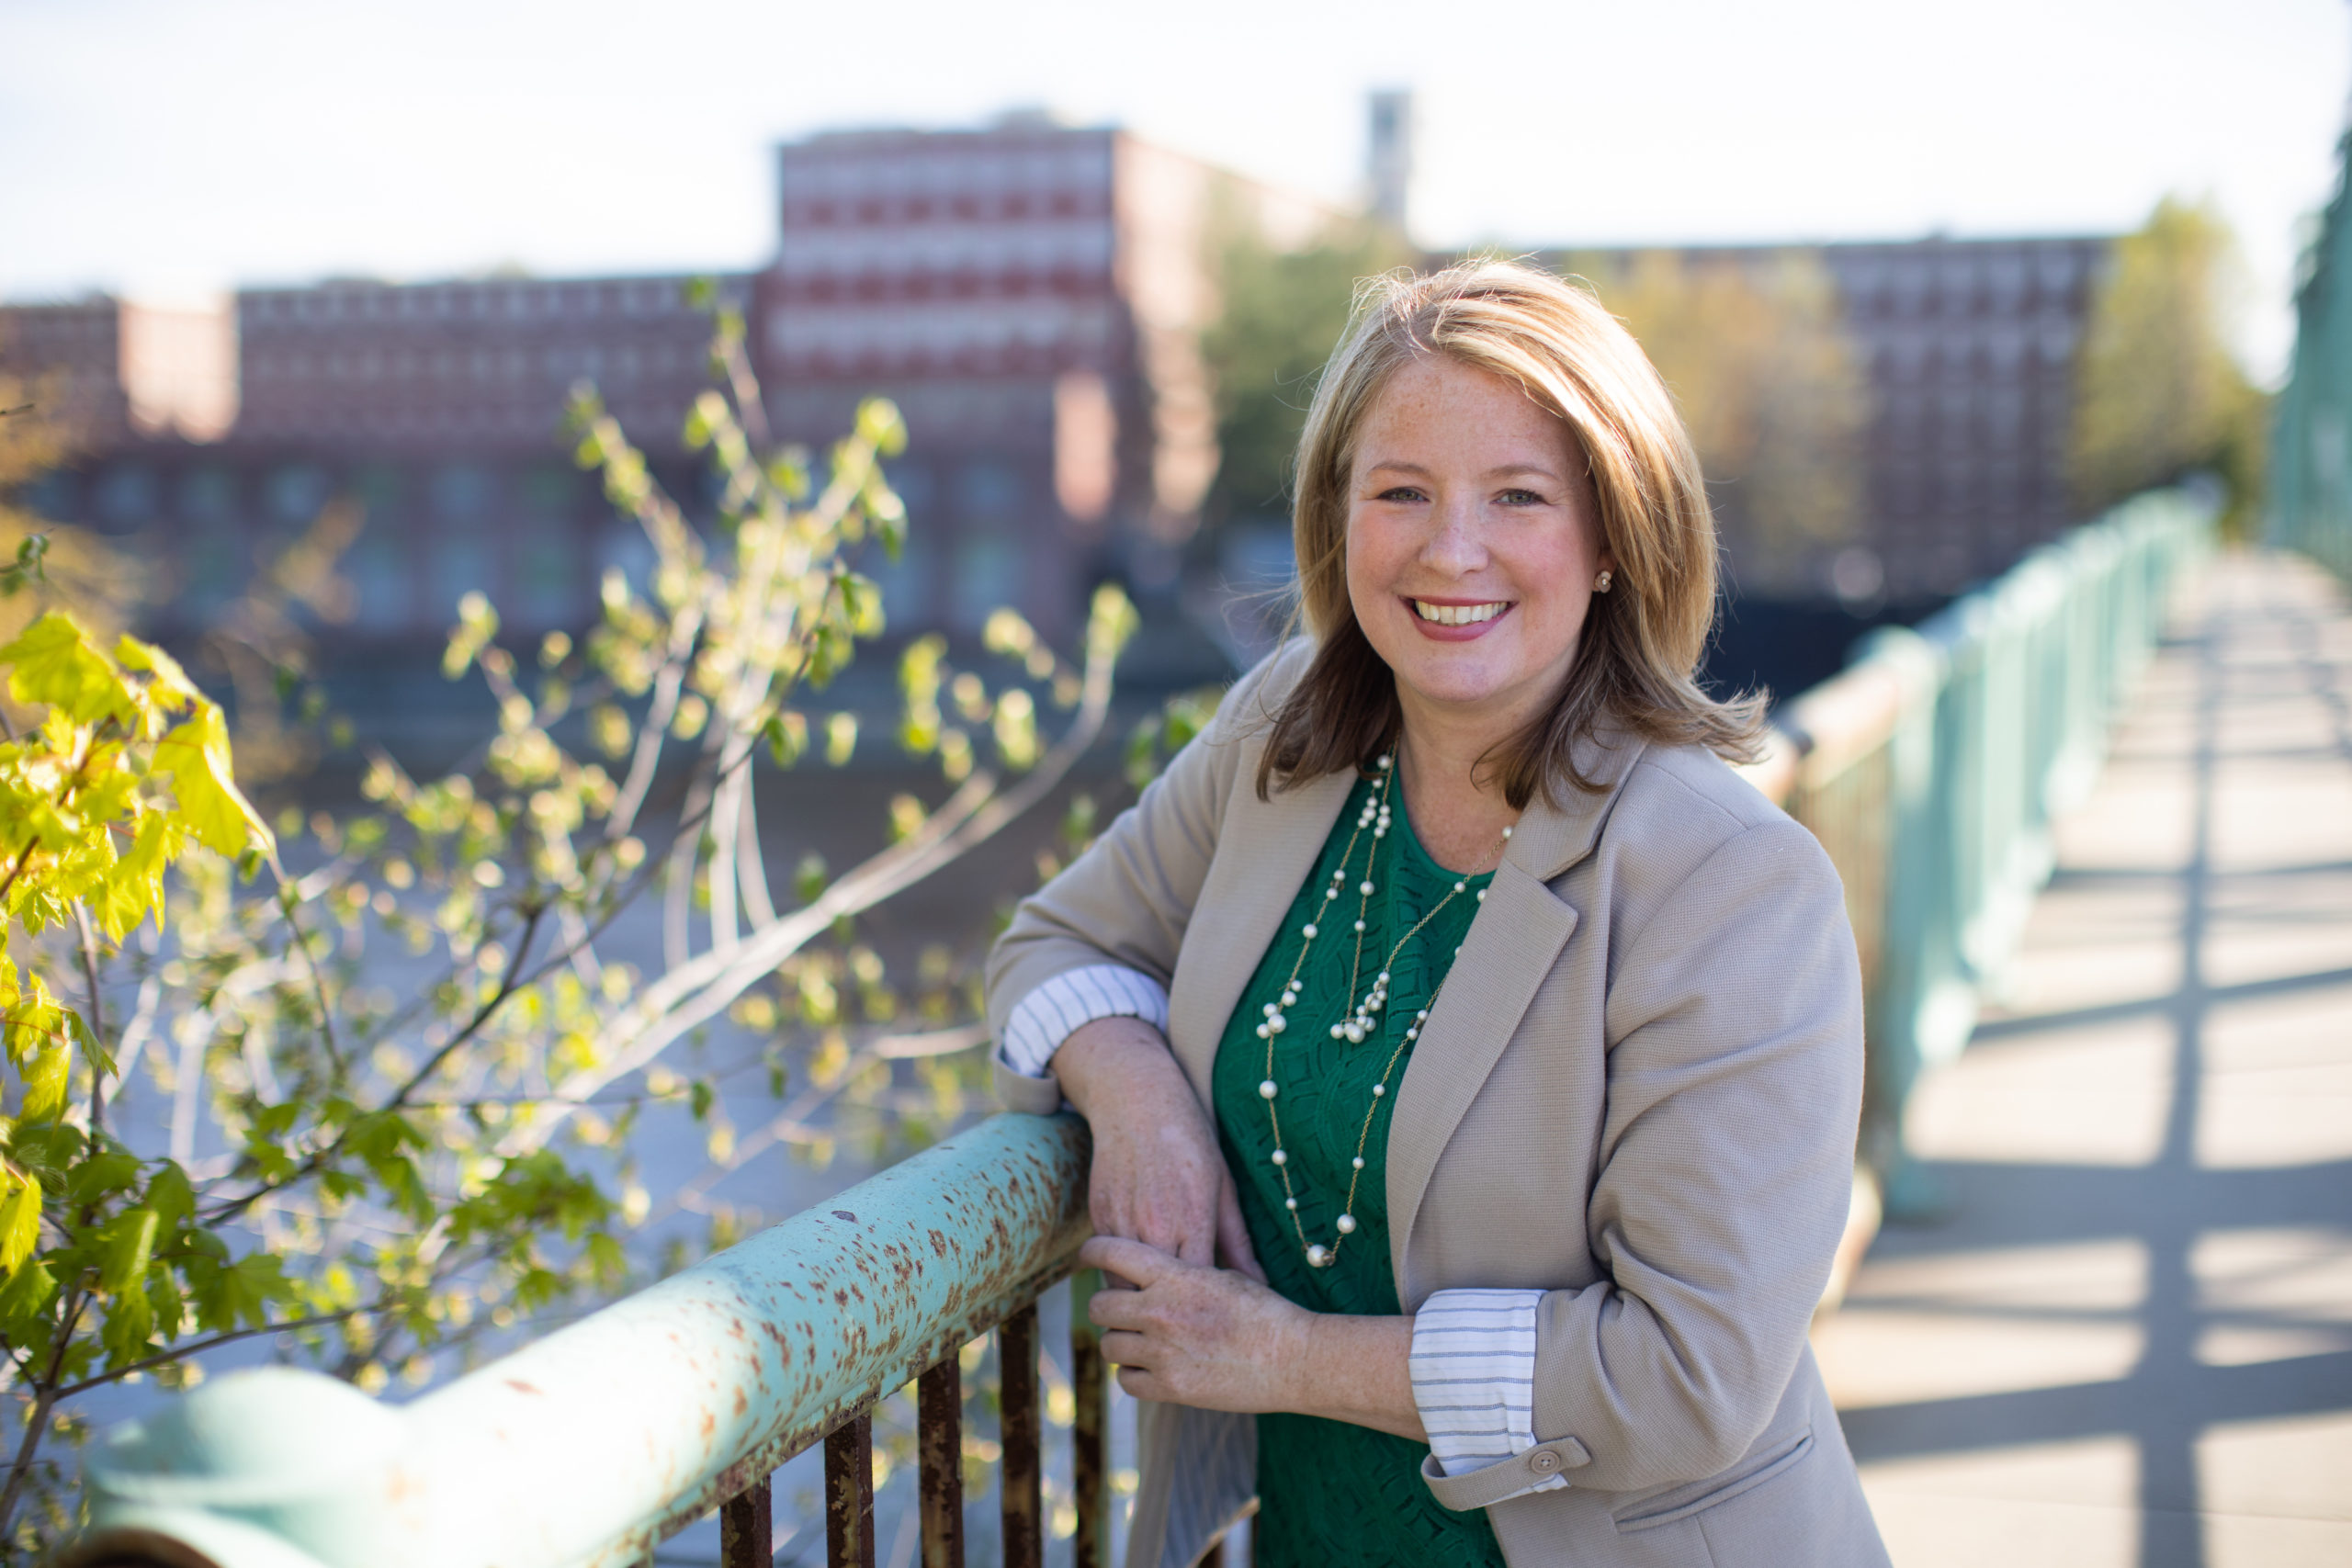 Lieutenant governor candidate, state Rep. Tami Gouveia visits hometown of Lowell